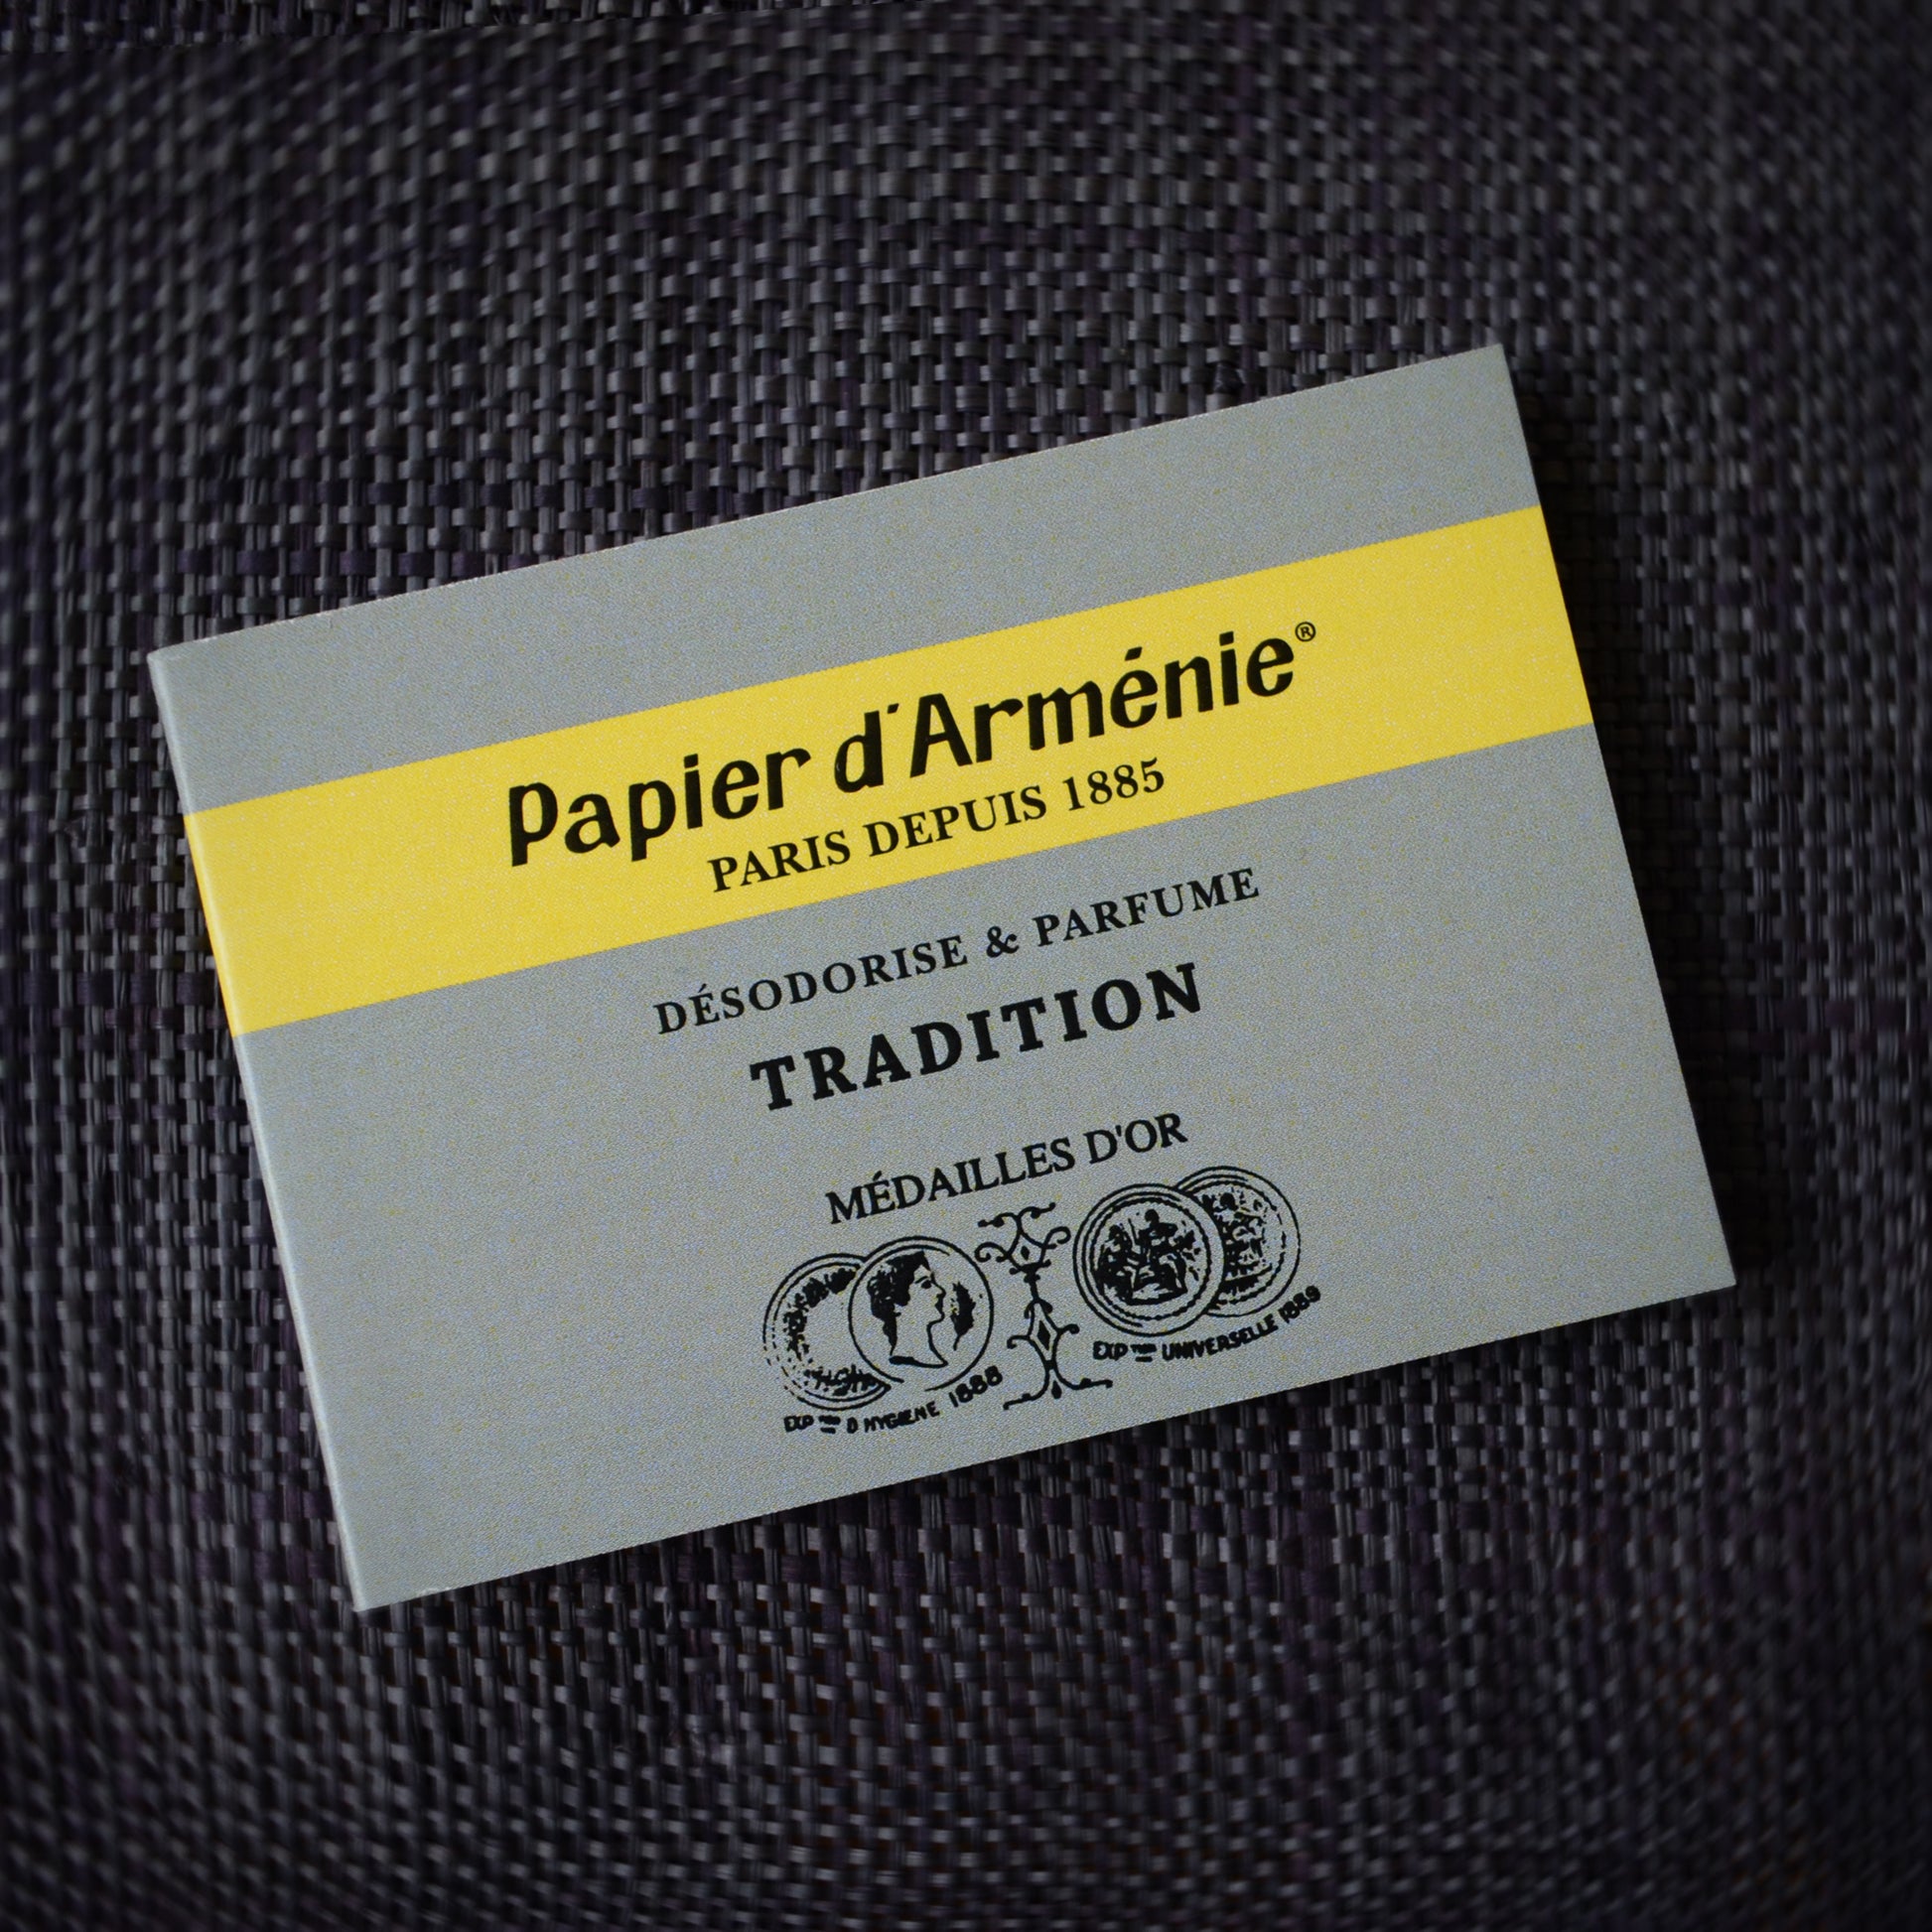 A booklet of traditional Papier d'Armenie on black woven fabric background.